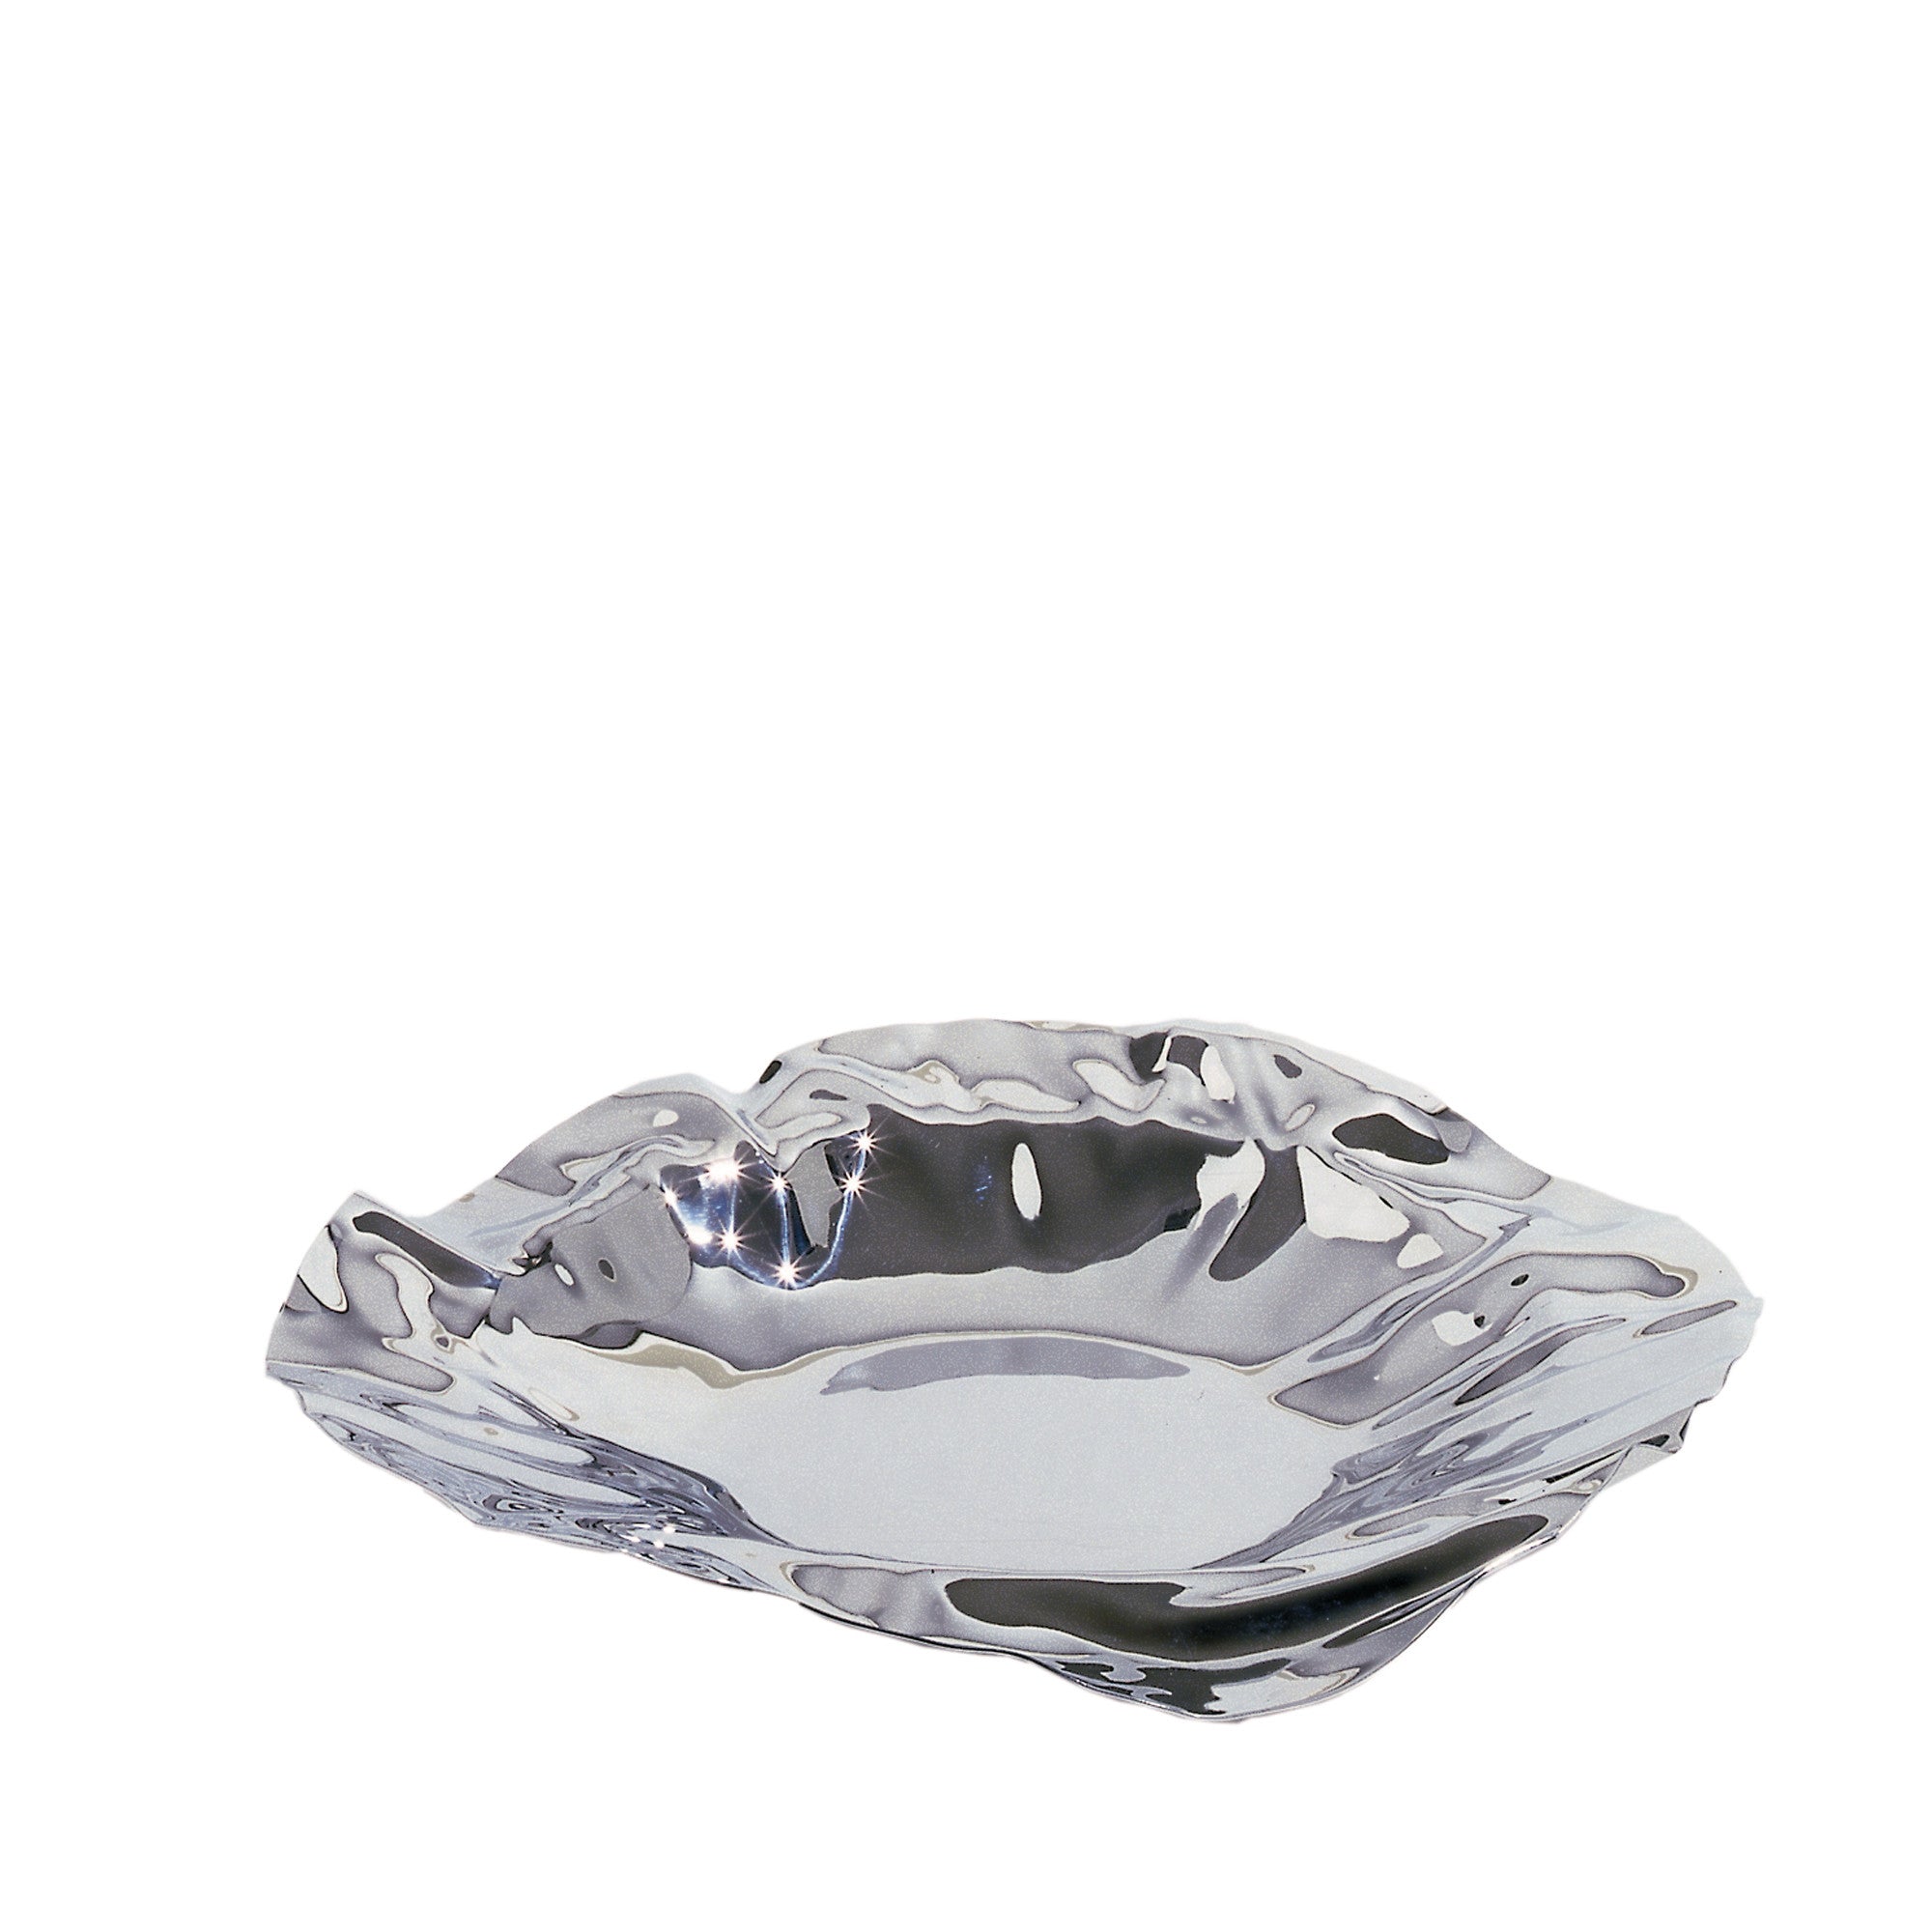 Alessi Port Basket in 18/10 Polished Stainless Steel cm 37